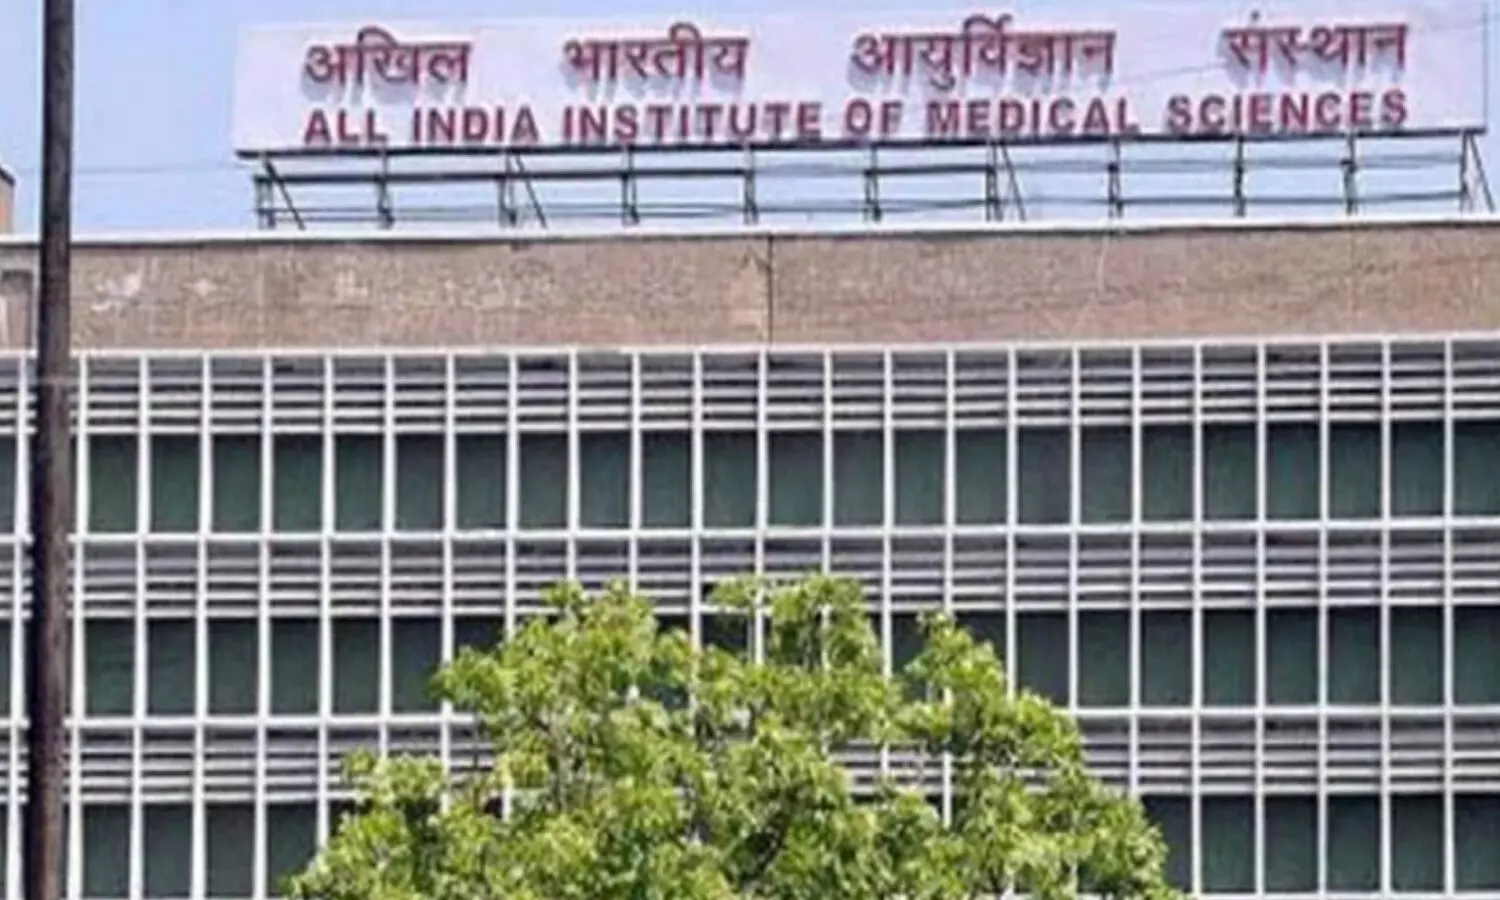 AIIMS holds medical, nursing entrance exams amid COVID outbreak; over 33,000 candidates appear on exam day